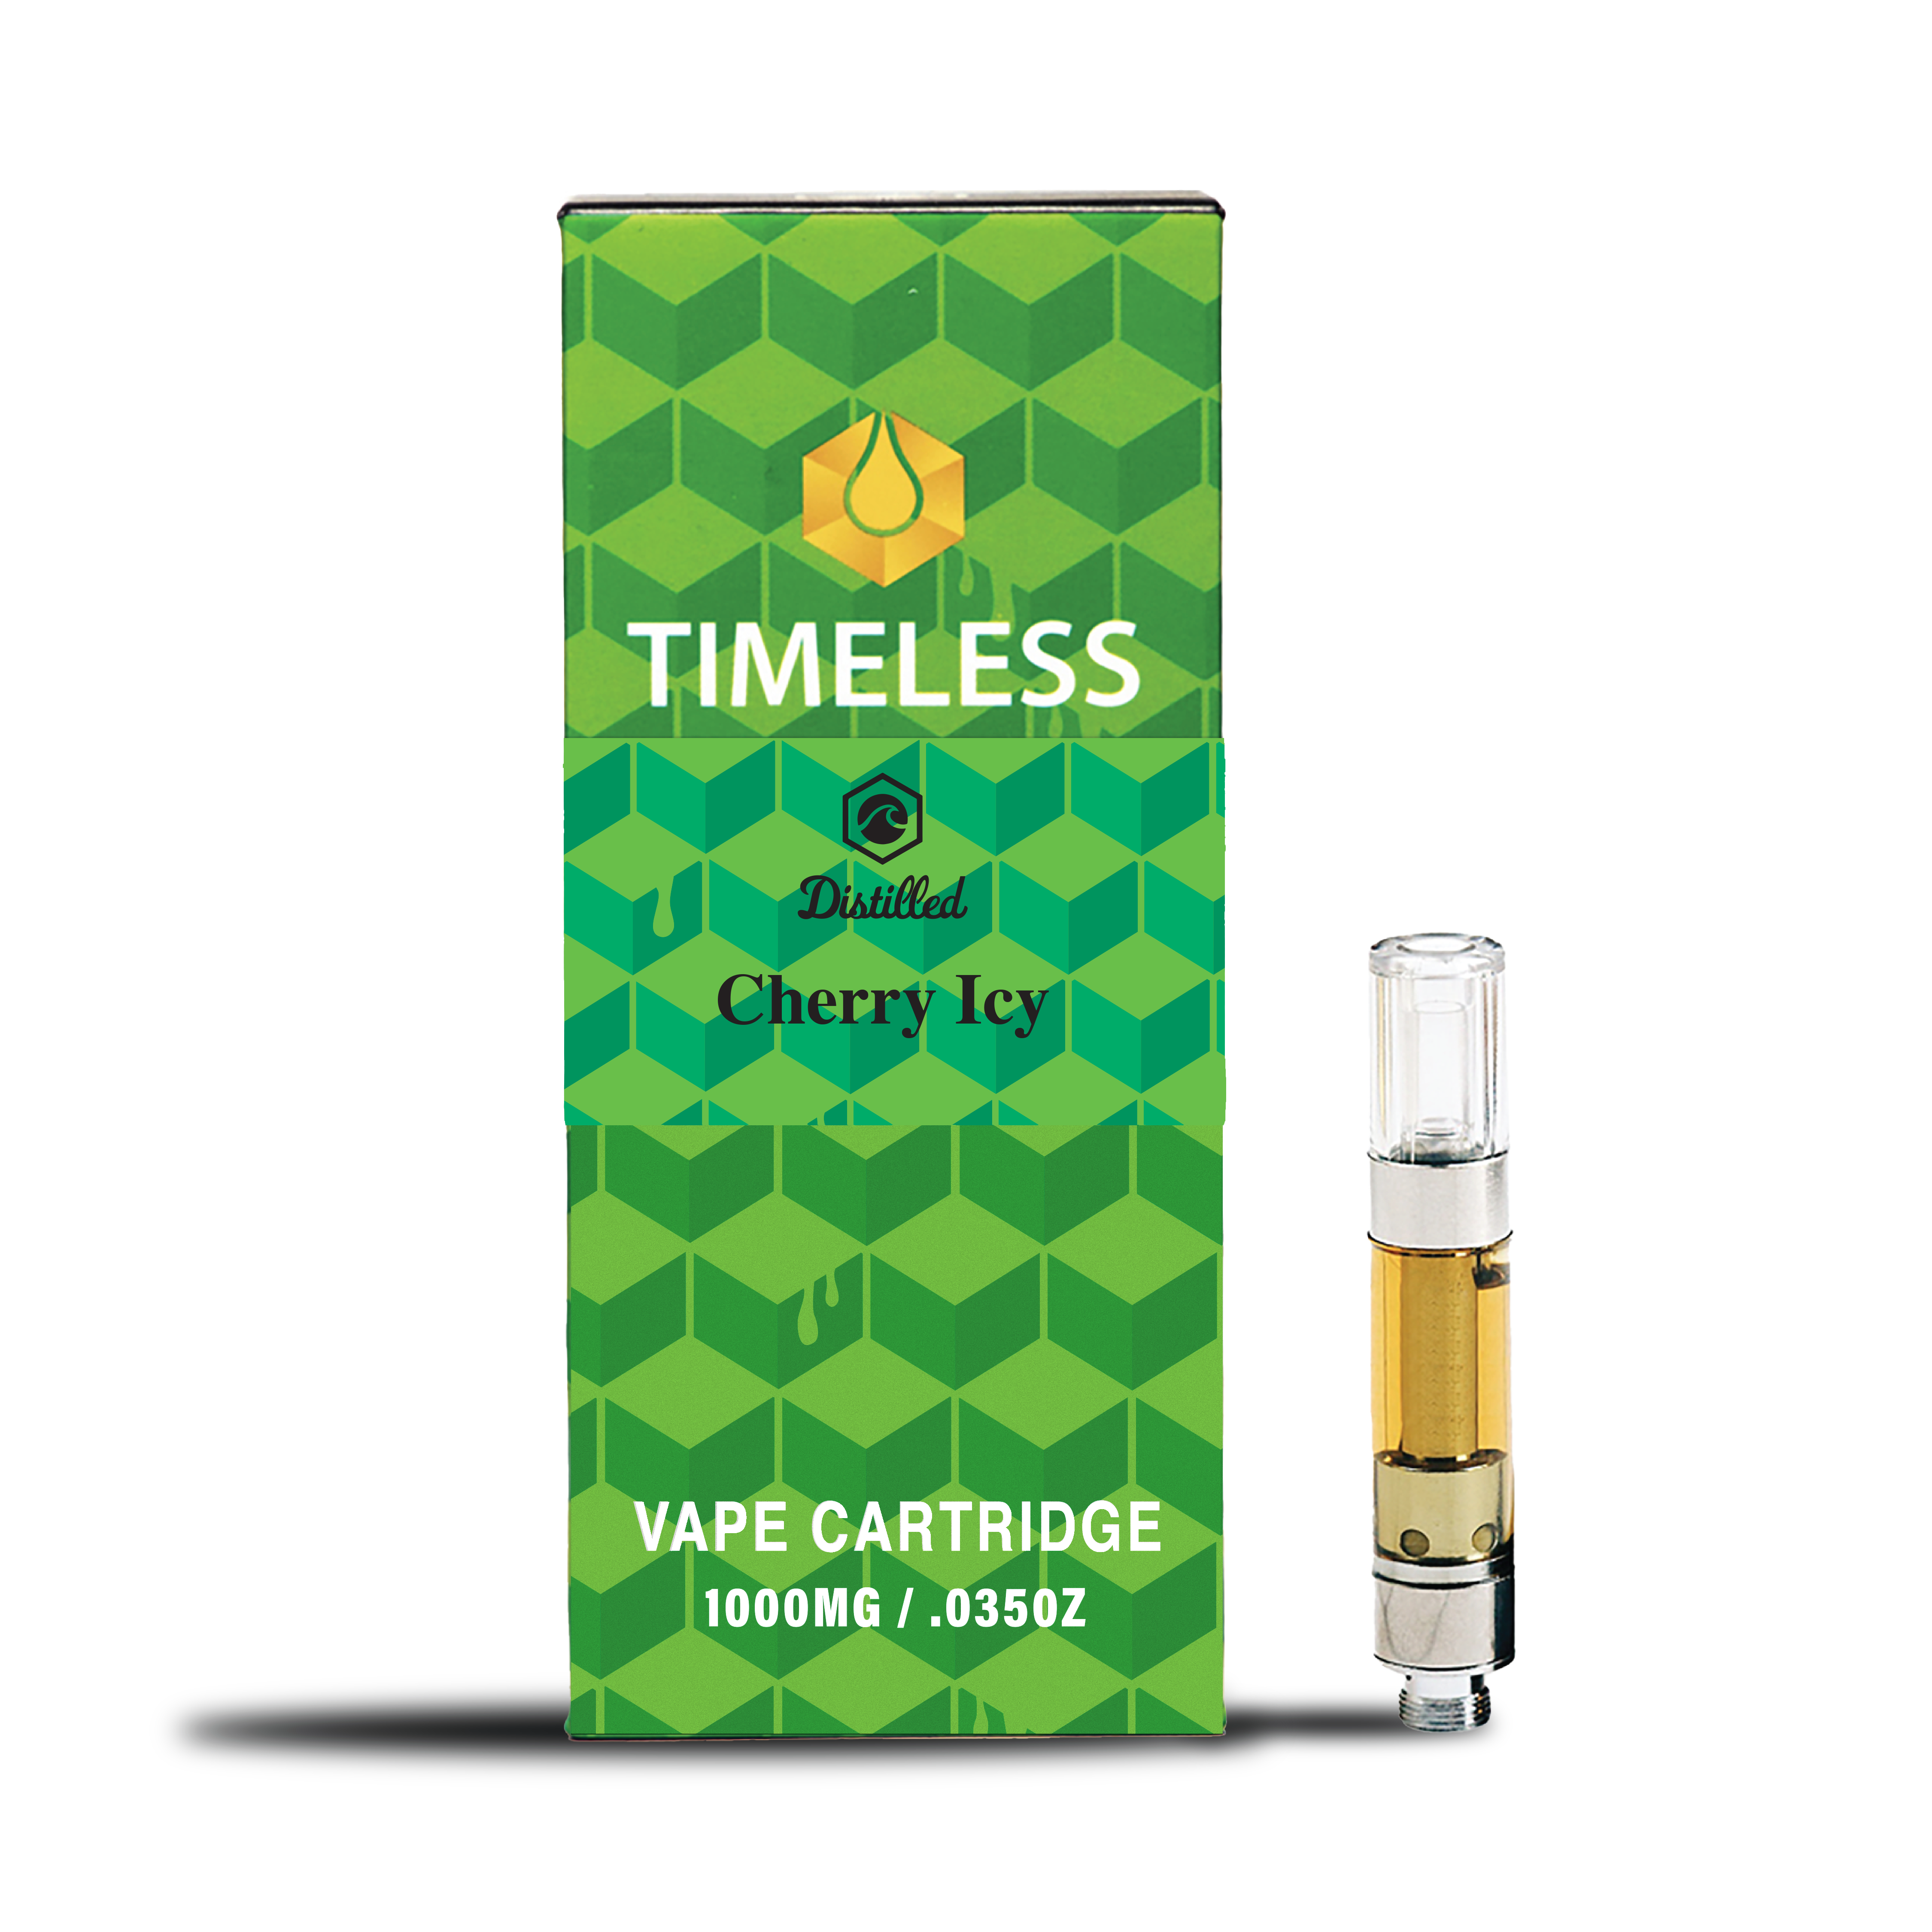 A photograph of Timeless Cartridge (Chill) 1g Cherry Icy